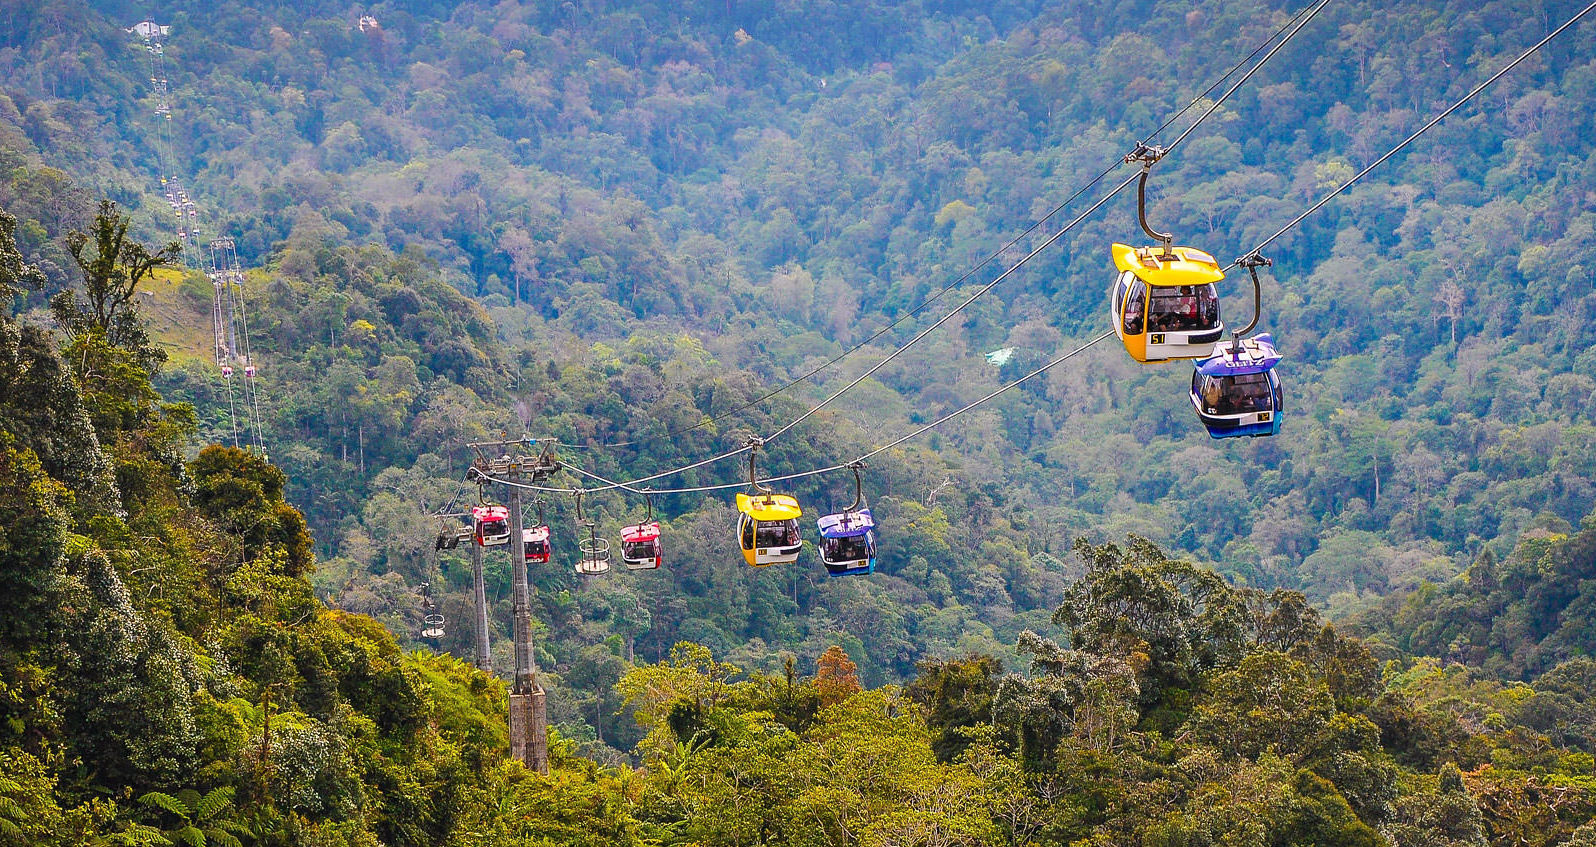 Genting Highlands Day Tour